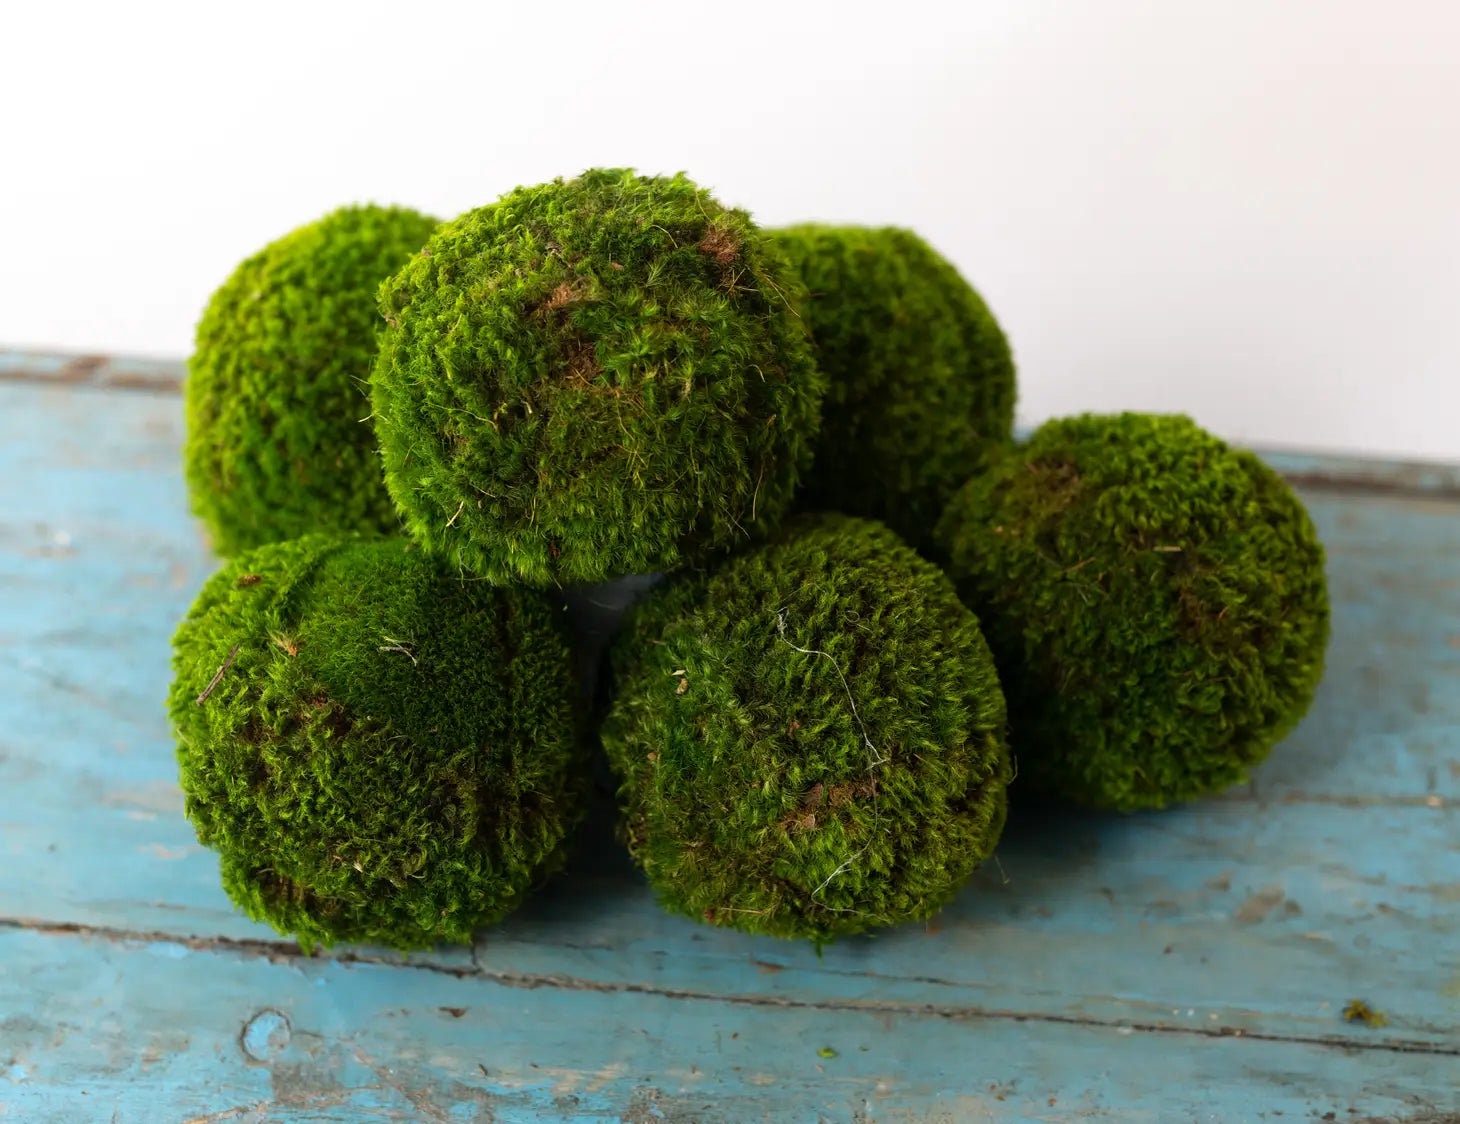 Qingbei Rina Moss Balls Decorative Bowl Fillers for Centerpiece,4 inch Set of 6,Large Moss Balls Green Decorative Balls,Preserved Marimo Moss Ball